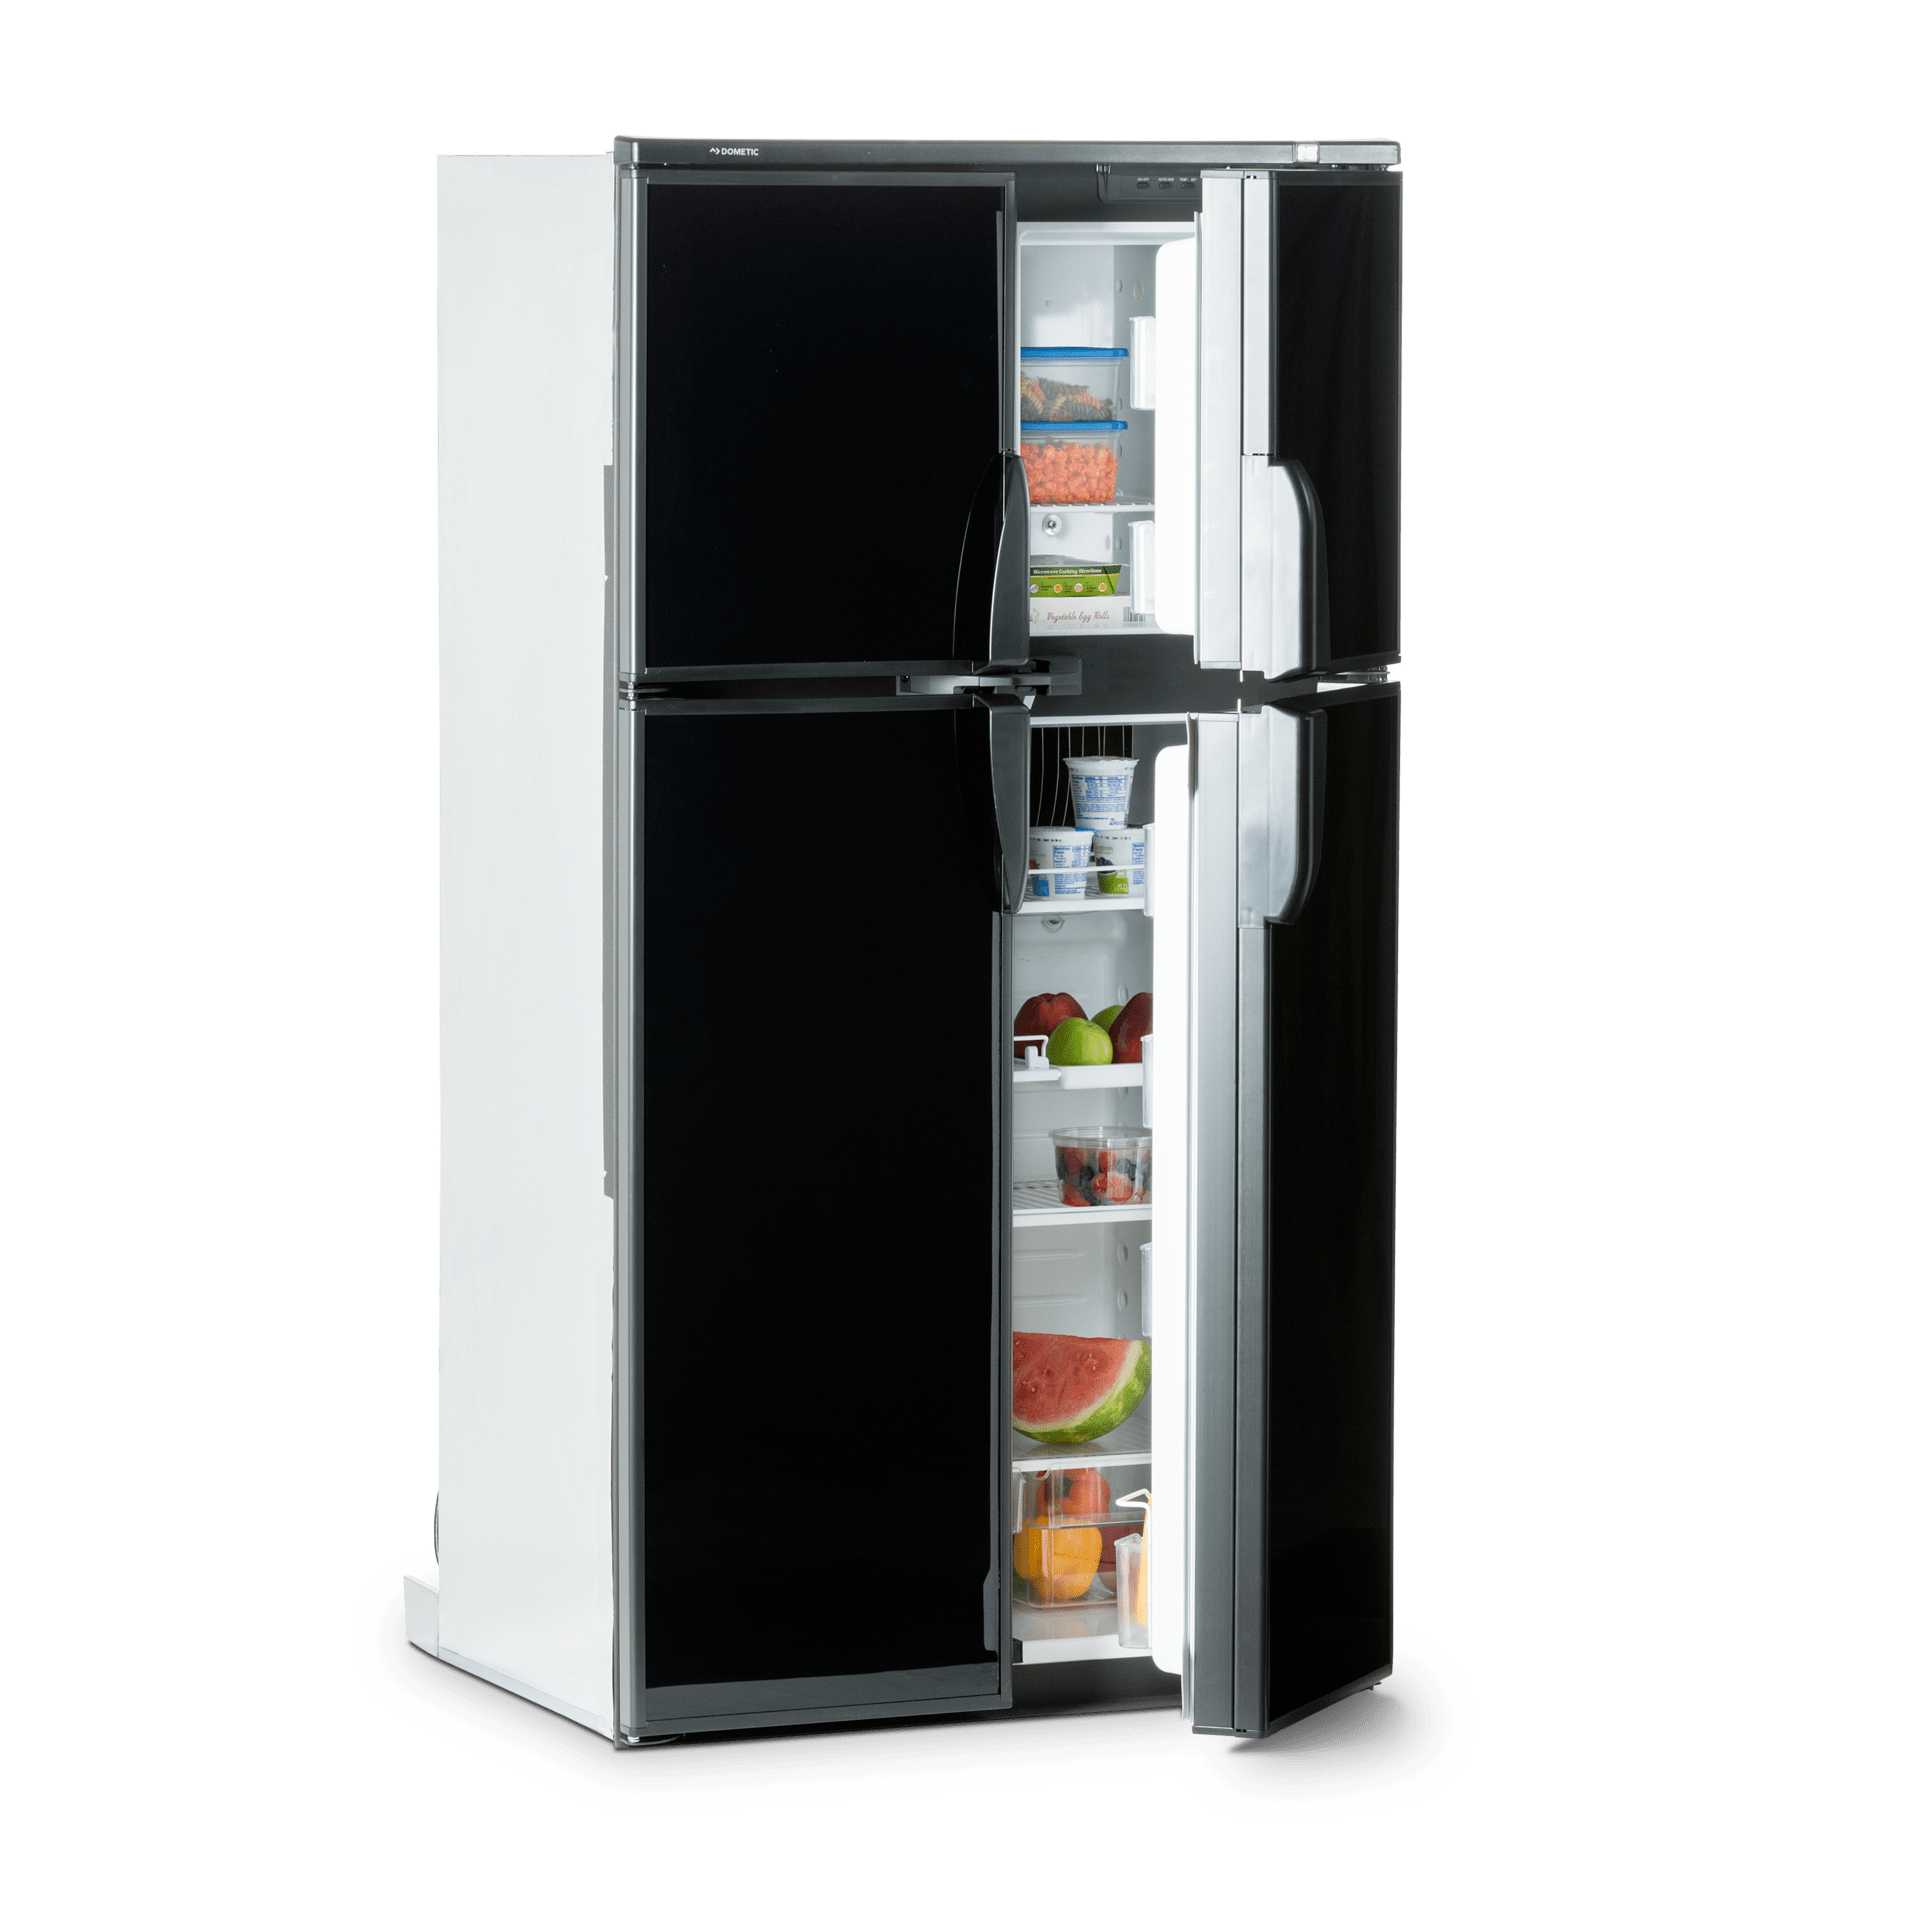 Norcold NR751BB Refrigerator (2.7 cubic foot) duel electric, AC/DC